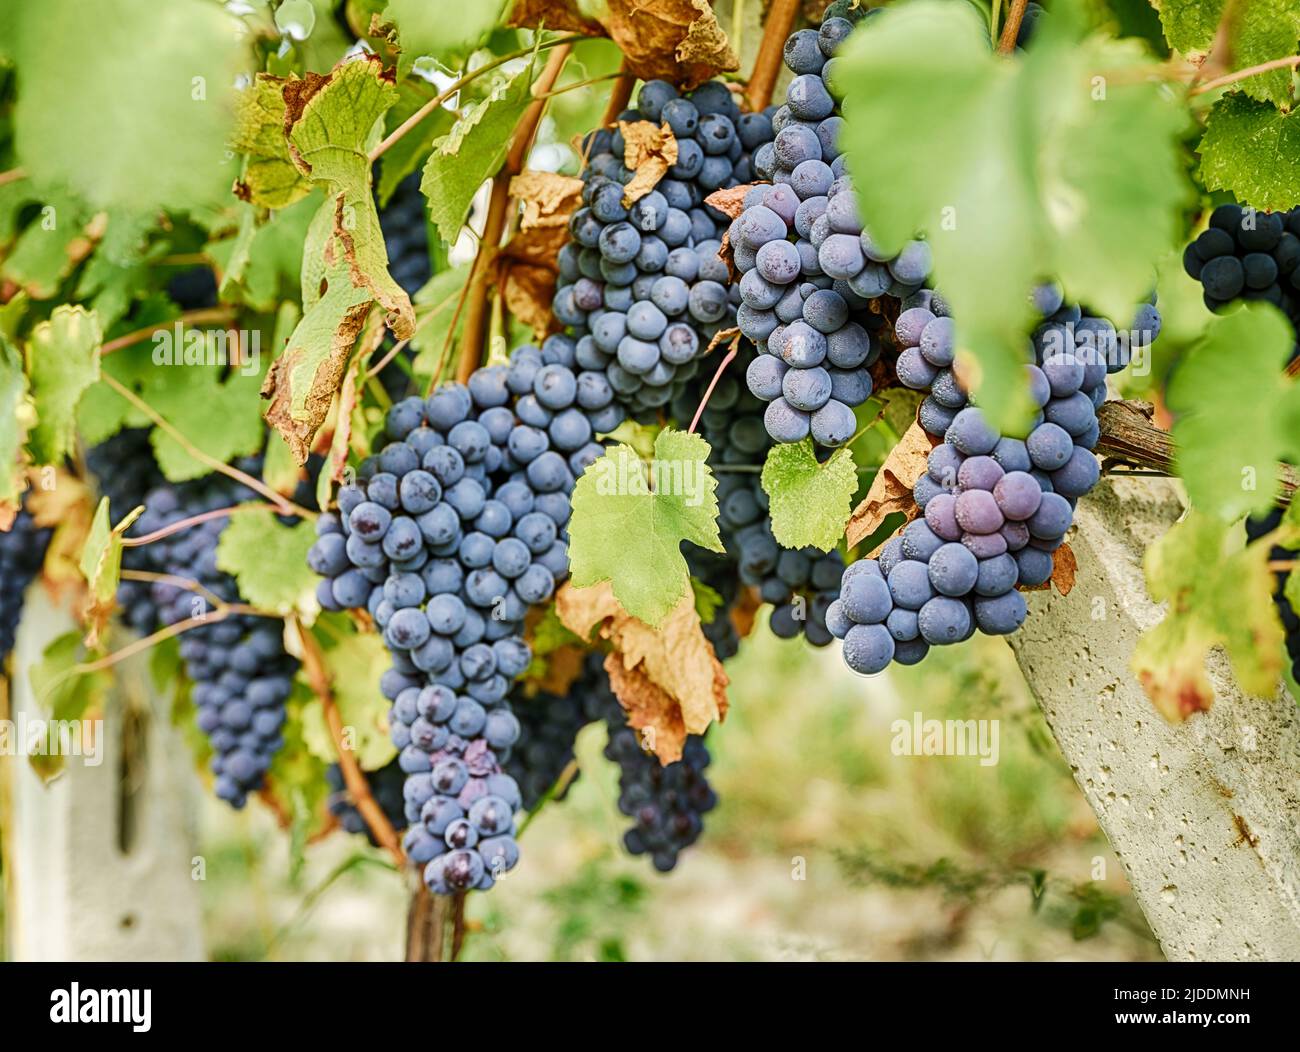 Dark, blue-skinned barbera grapes are ripe and ready to pick in a vineyard near Serralunga in the Piedmont region of Italy. Stock Photo